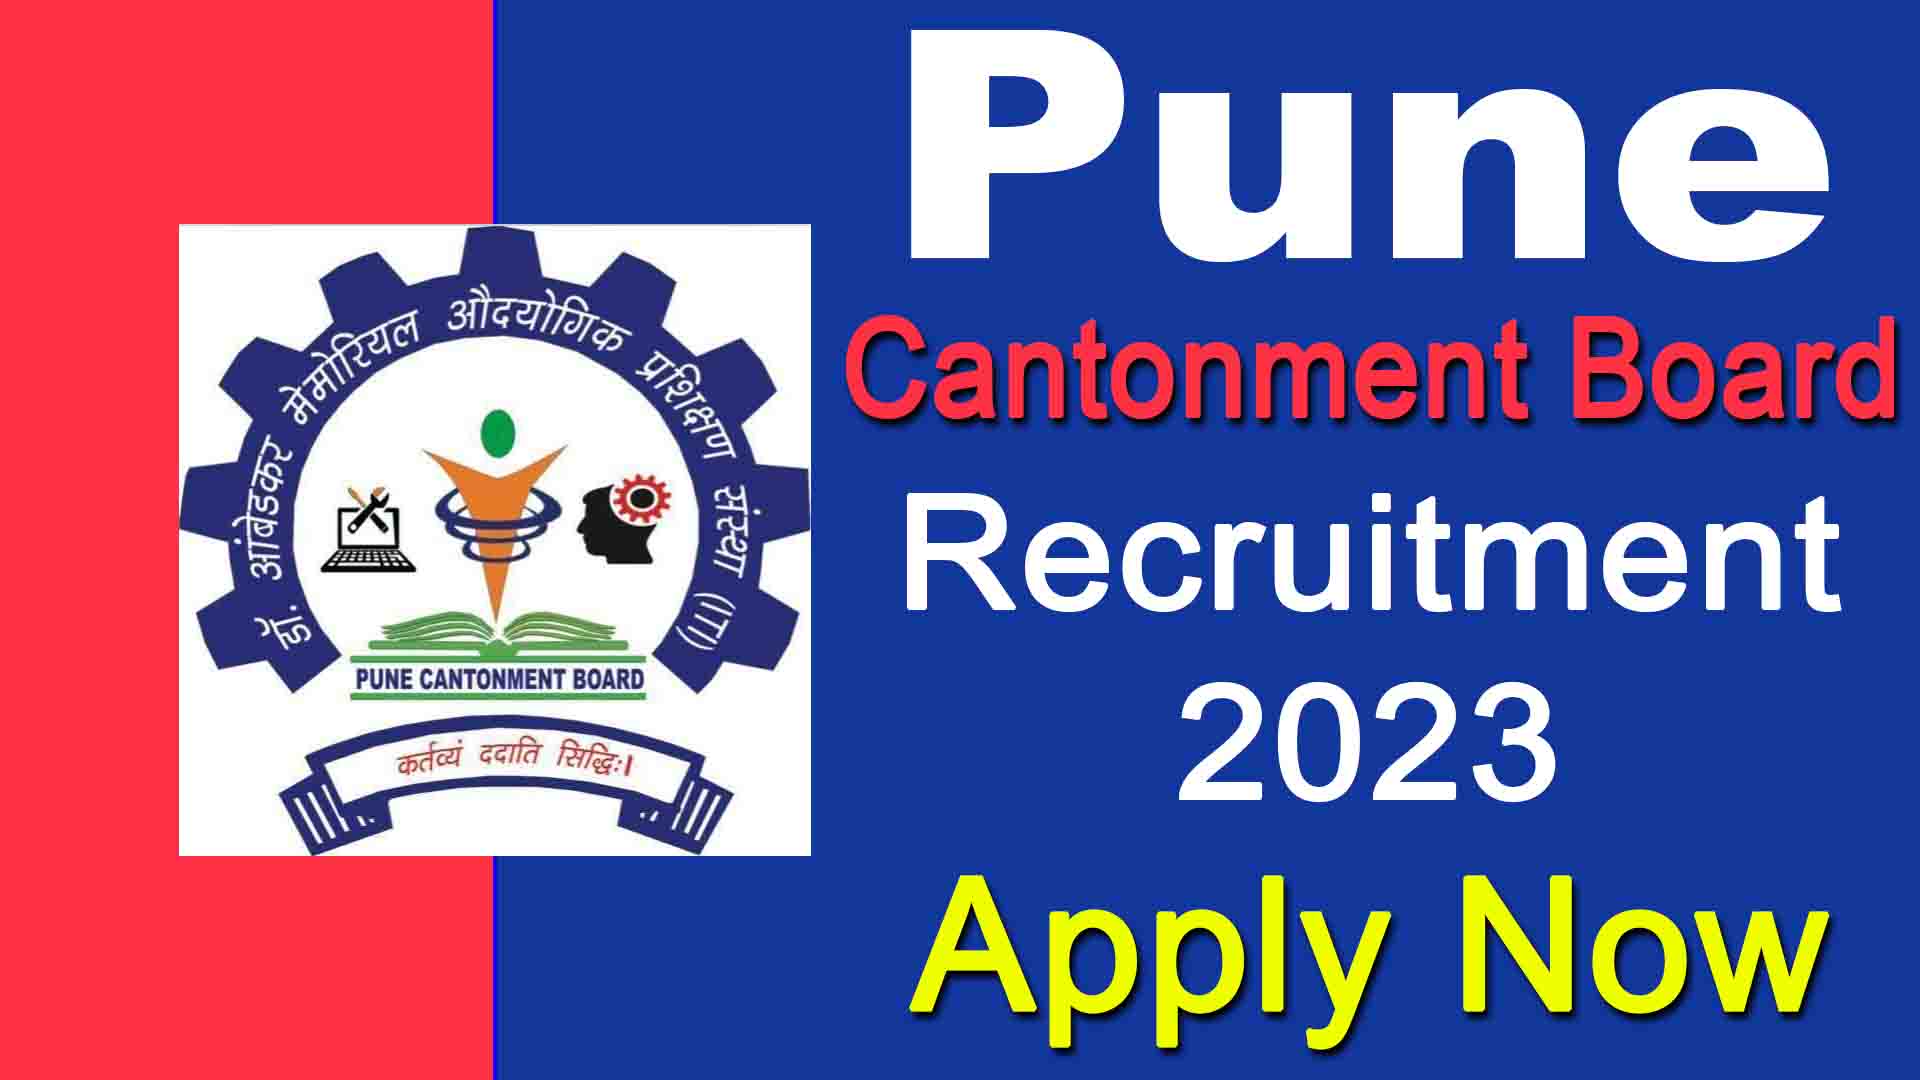 Pune Cantonment Board Recruitment 2023 Apply Now